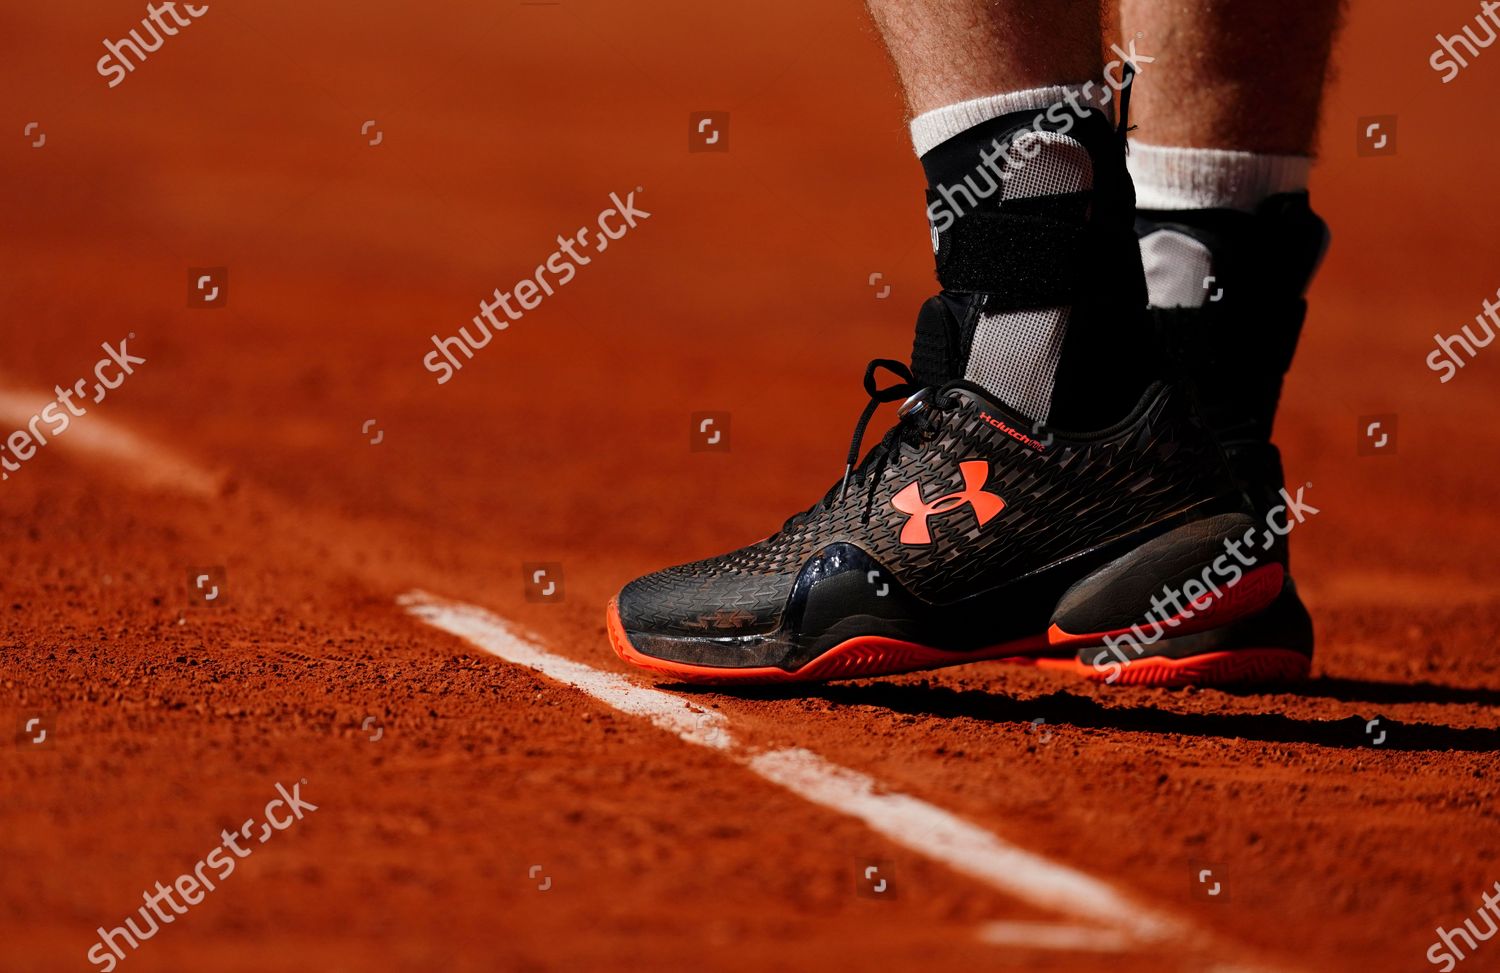 andy murray nike shoes